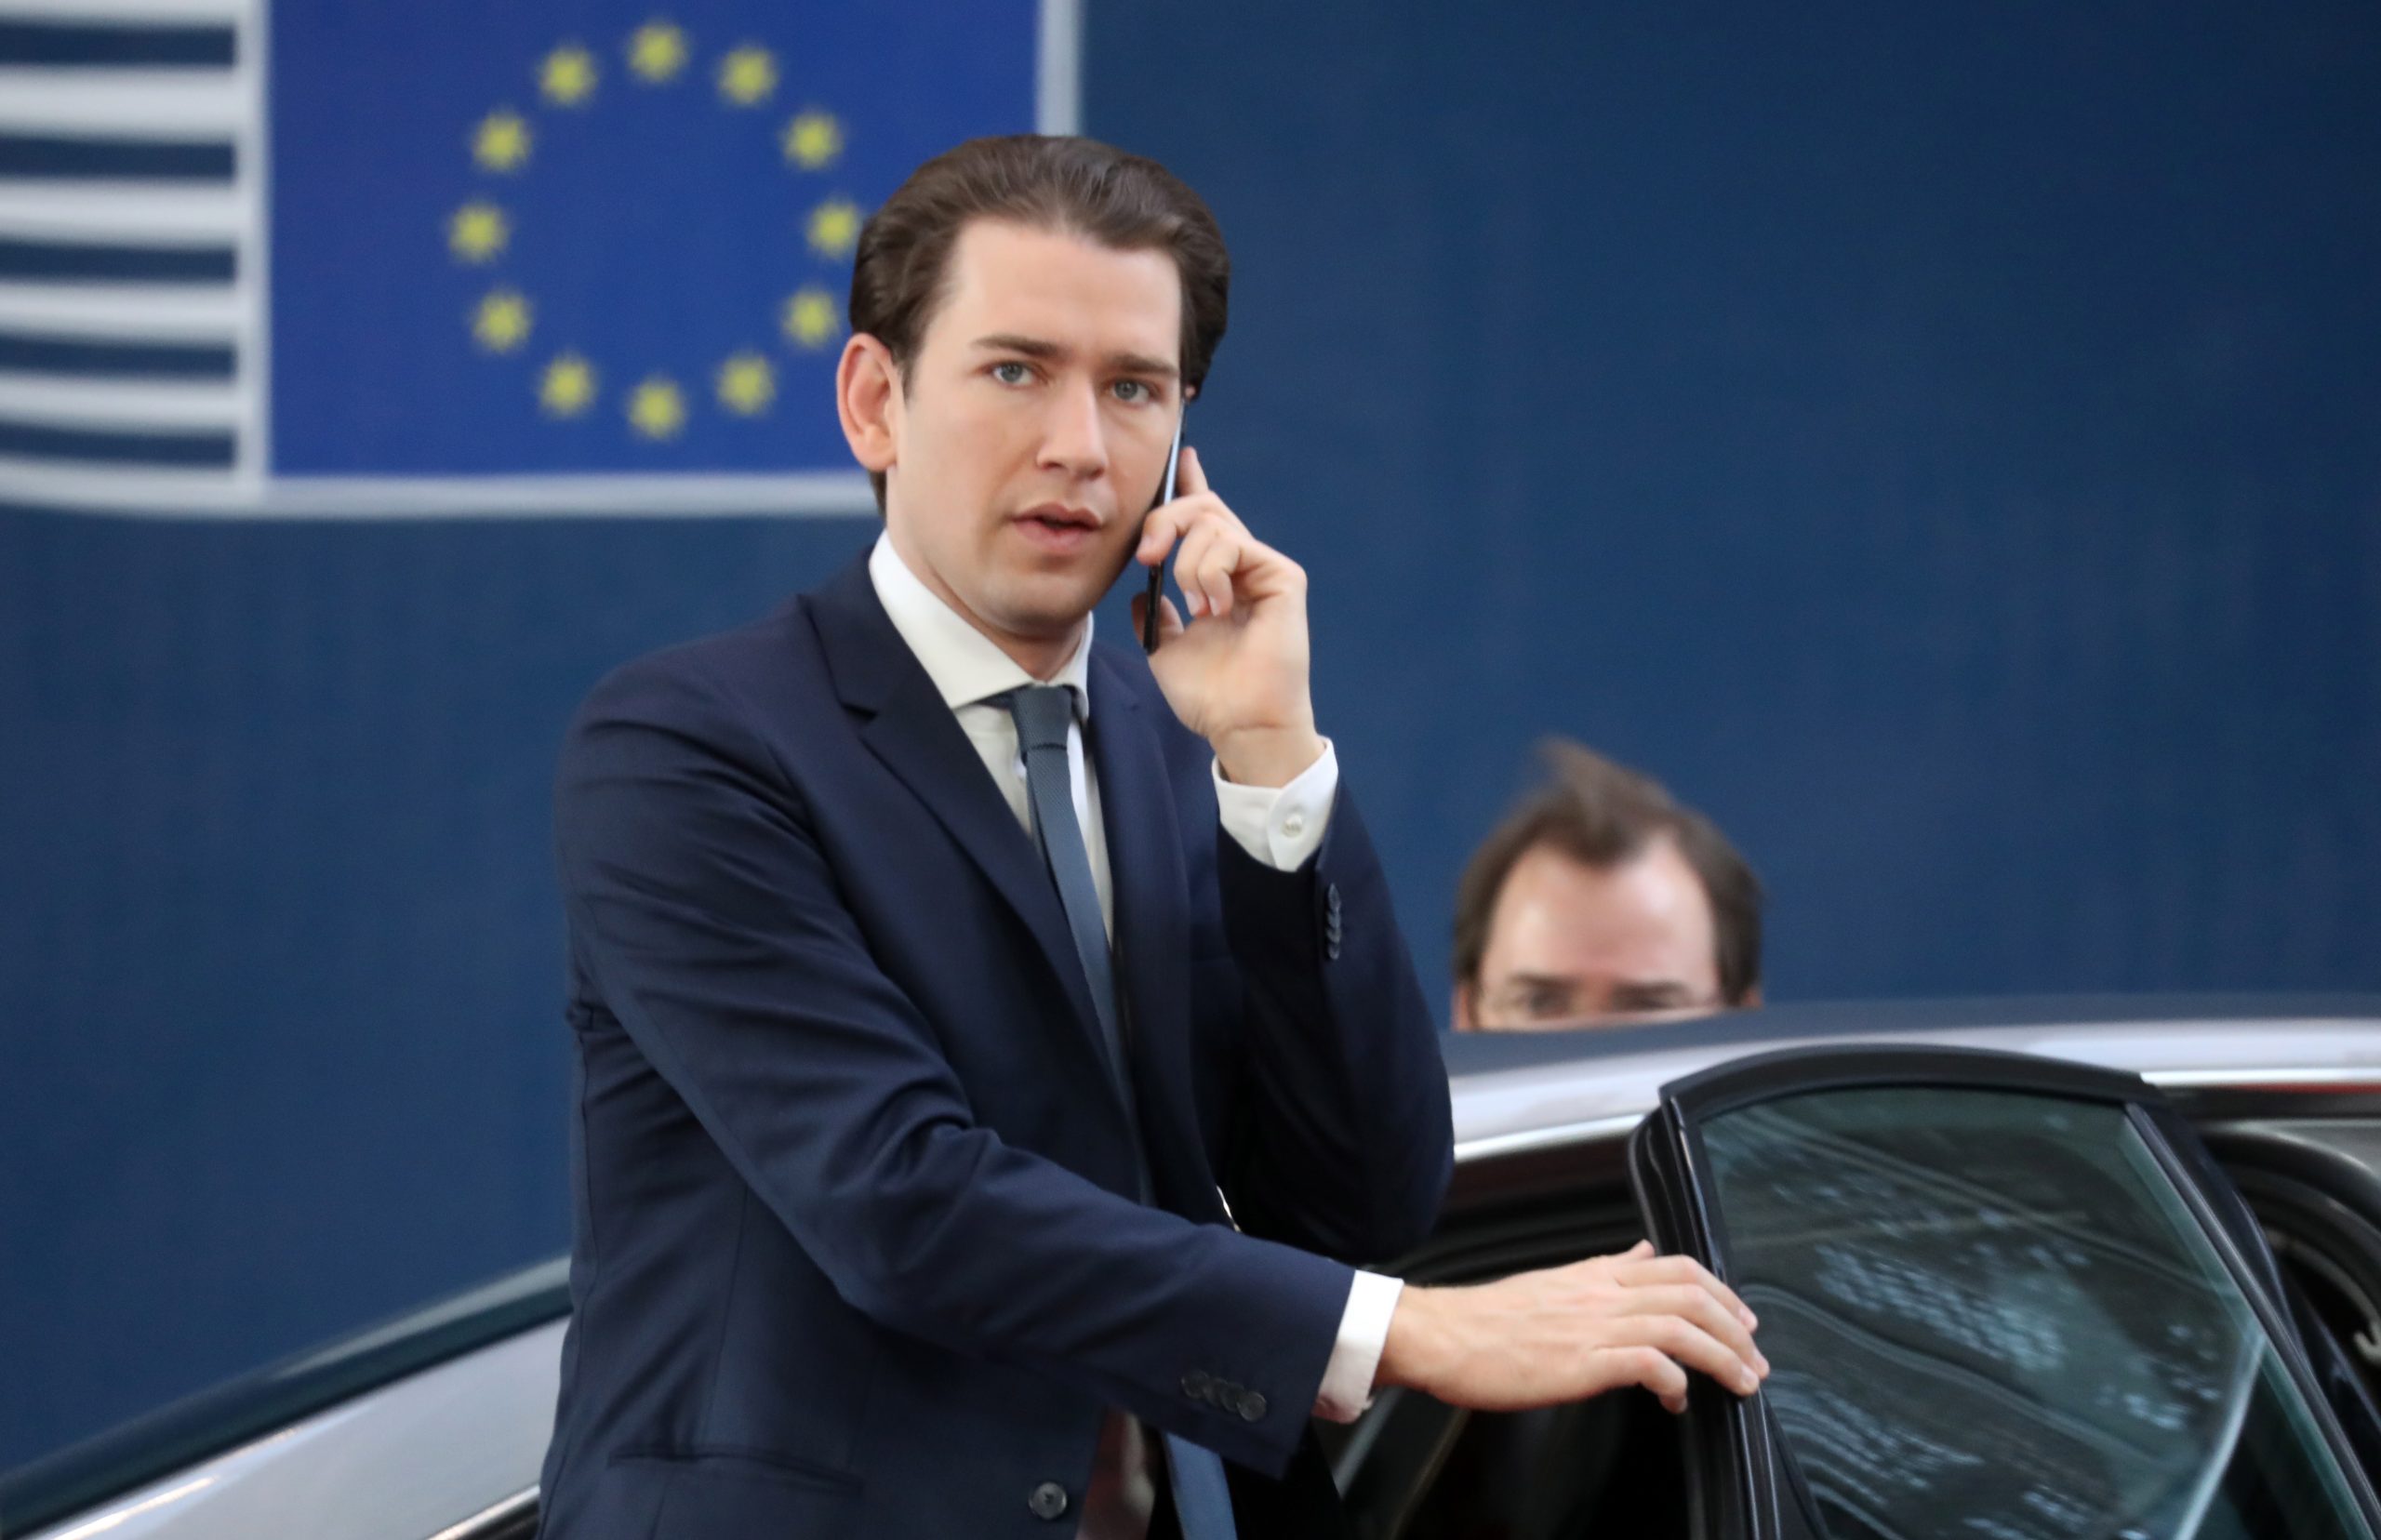 epa08233648 Austria's Chancellor Sebastian Kurz arrives for the second day of a Special European Council summit in Brussels, Belgium, 21 February 2020. EU heads of state or government gather for a special meeting to discuss the EU’s long-term budget for 2021-2027.  EPA/LUDOVIC MARIN / POOL